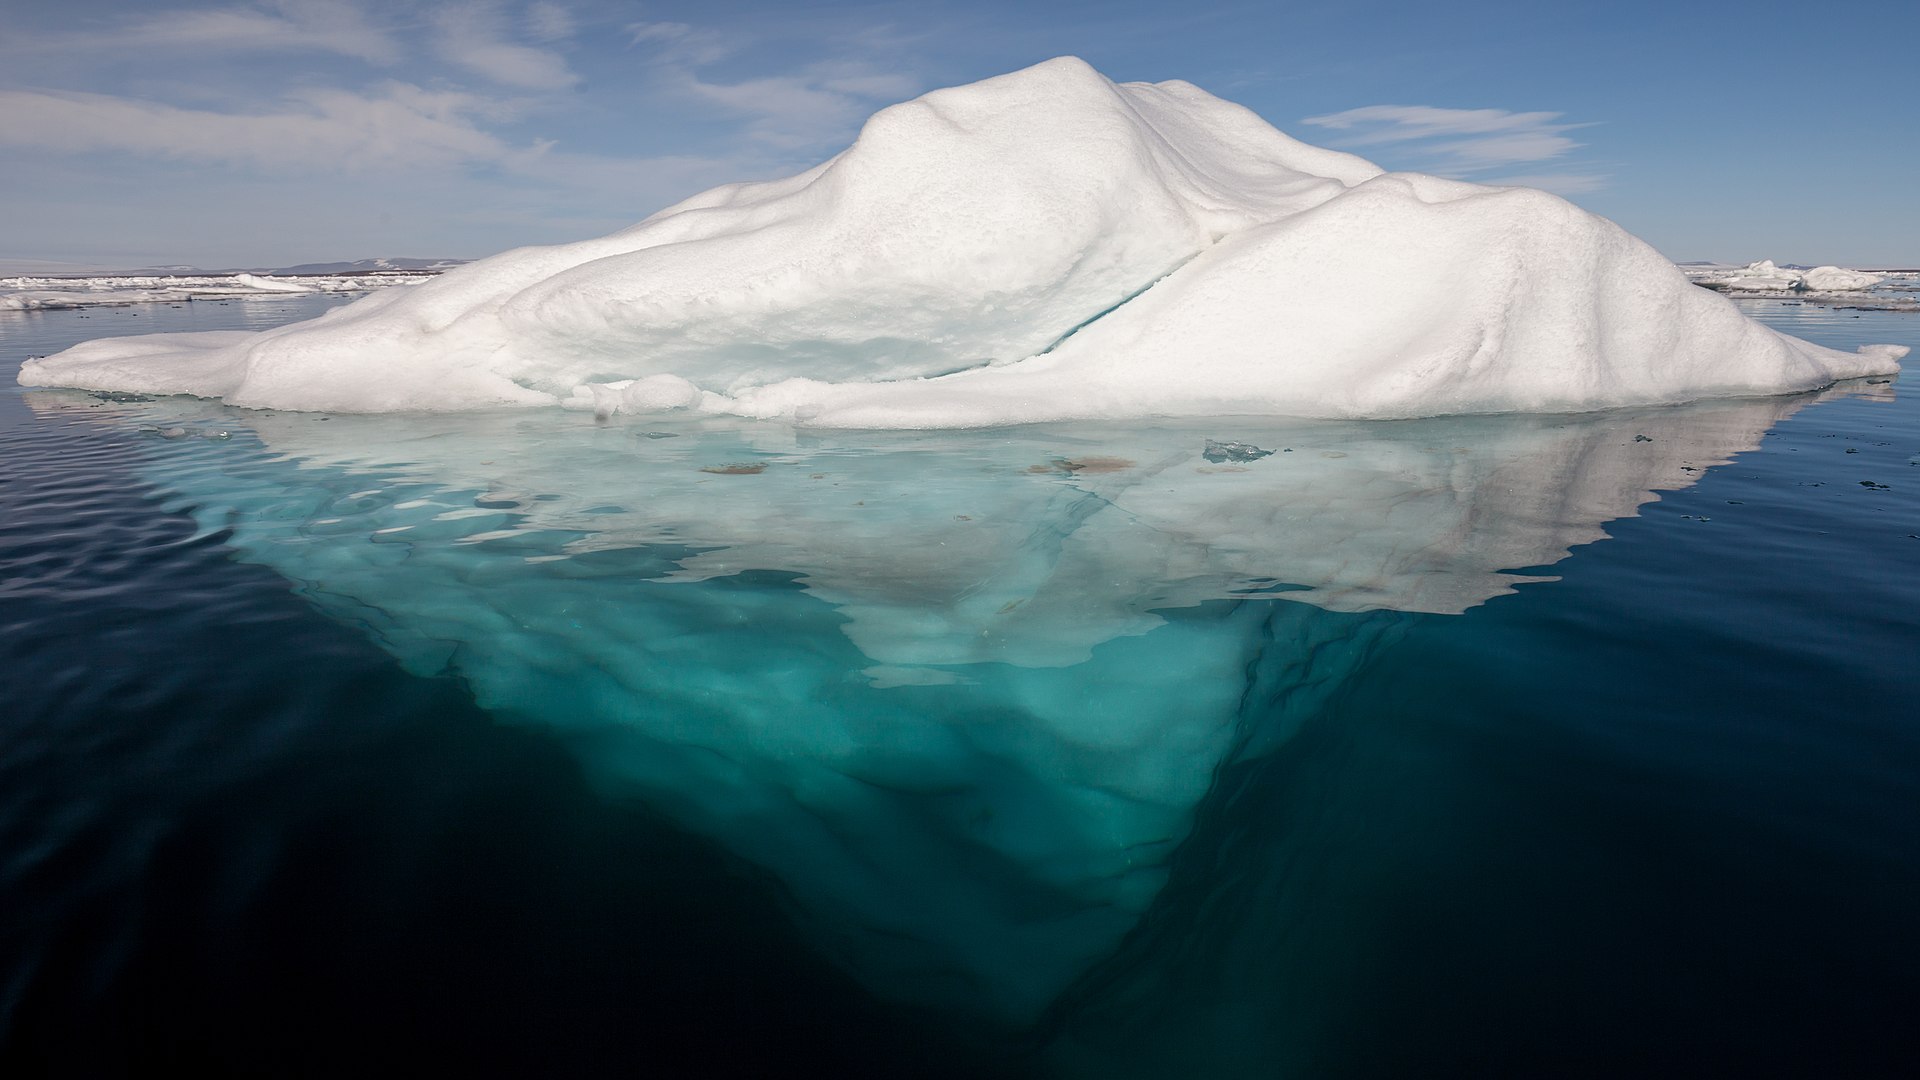 An iceburg floating with more ice below water than above